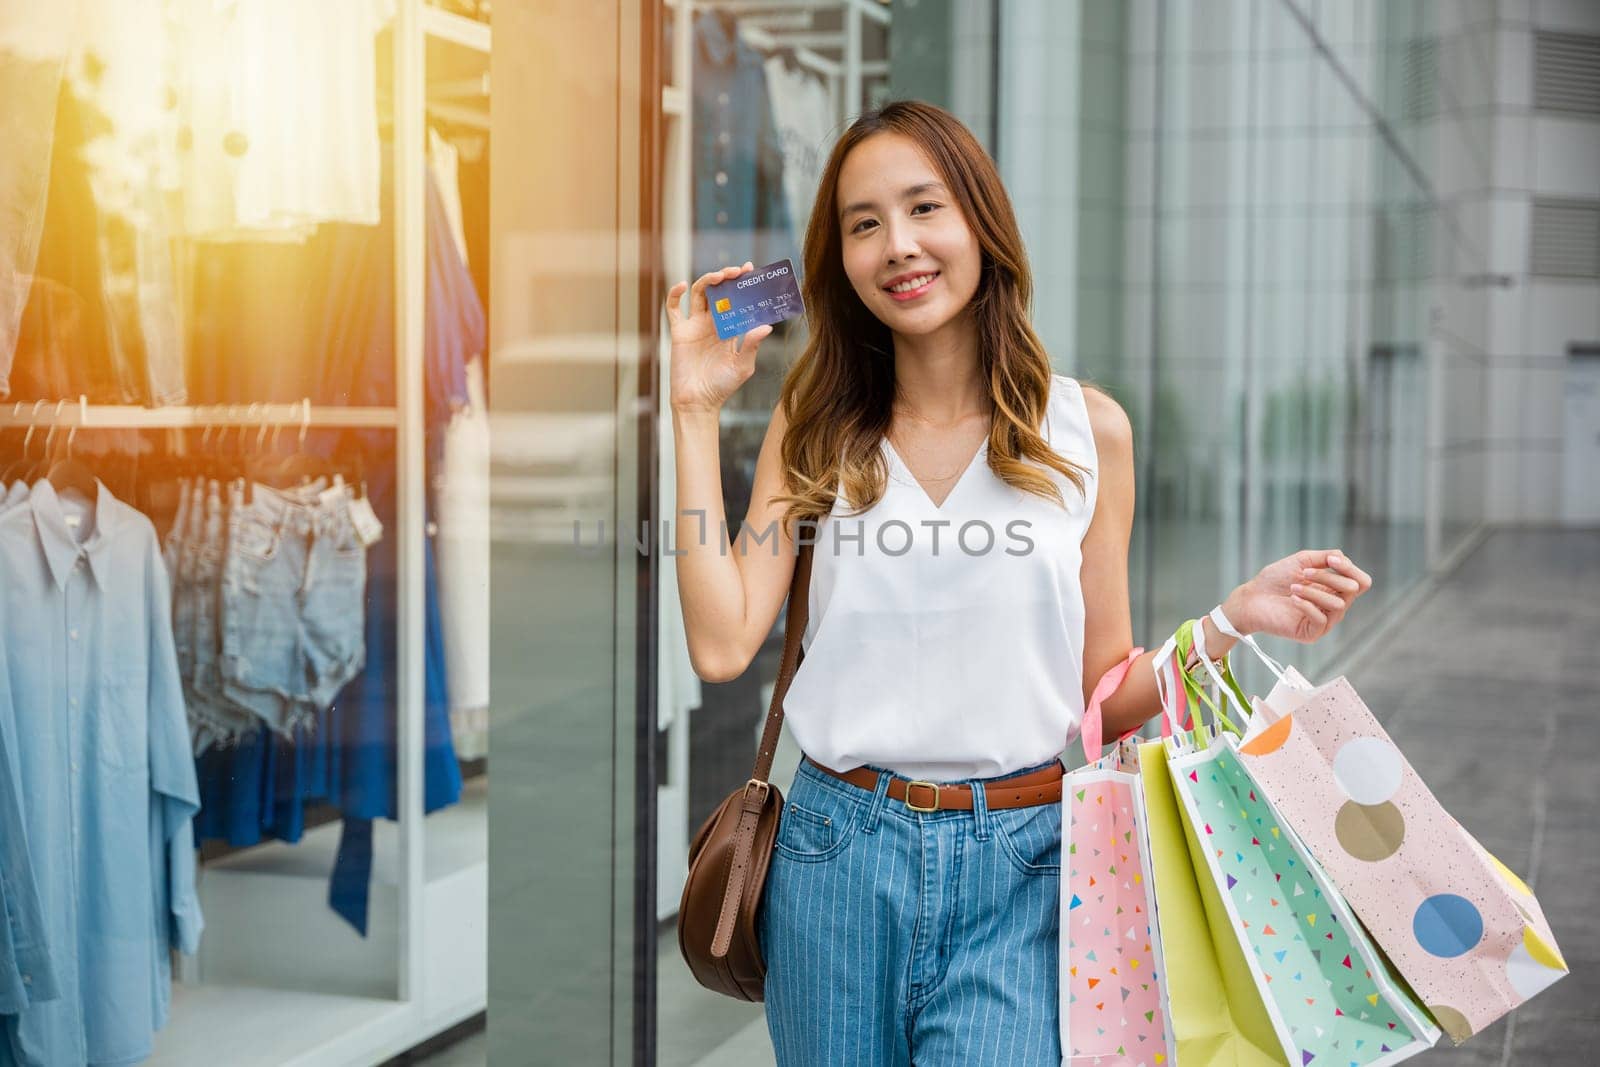 A young woman with a smile holds shopping bags and a credit card in front of a store window. She's ready to spend money and take advantage of the latest discounts and deals